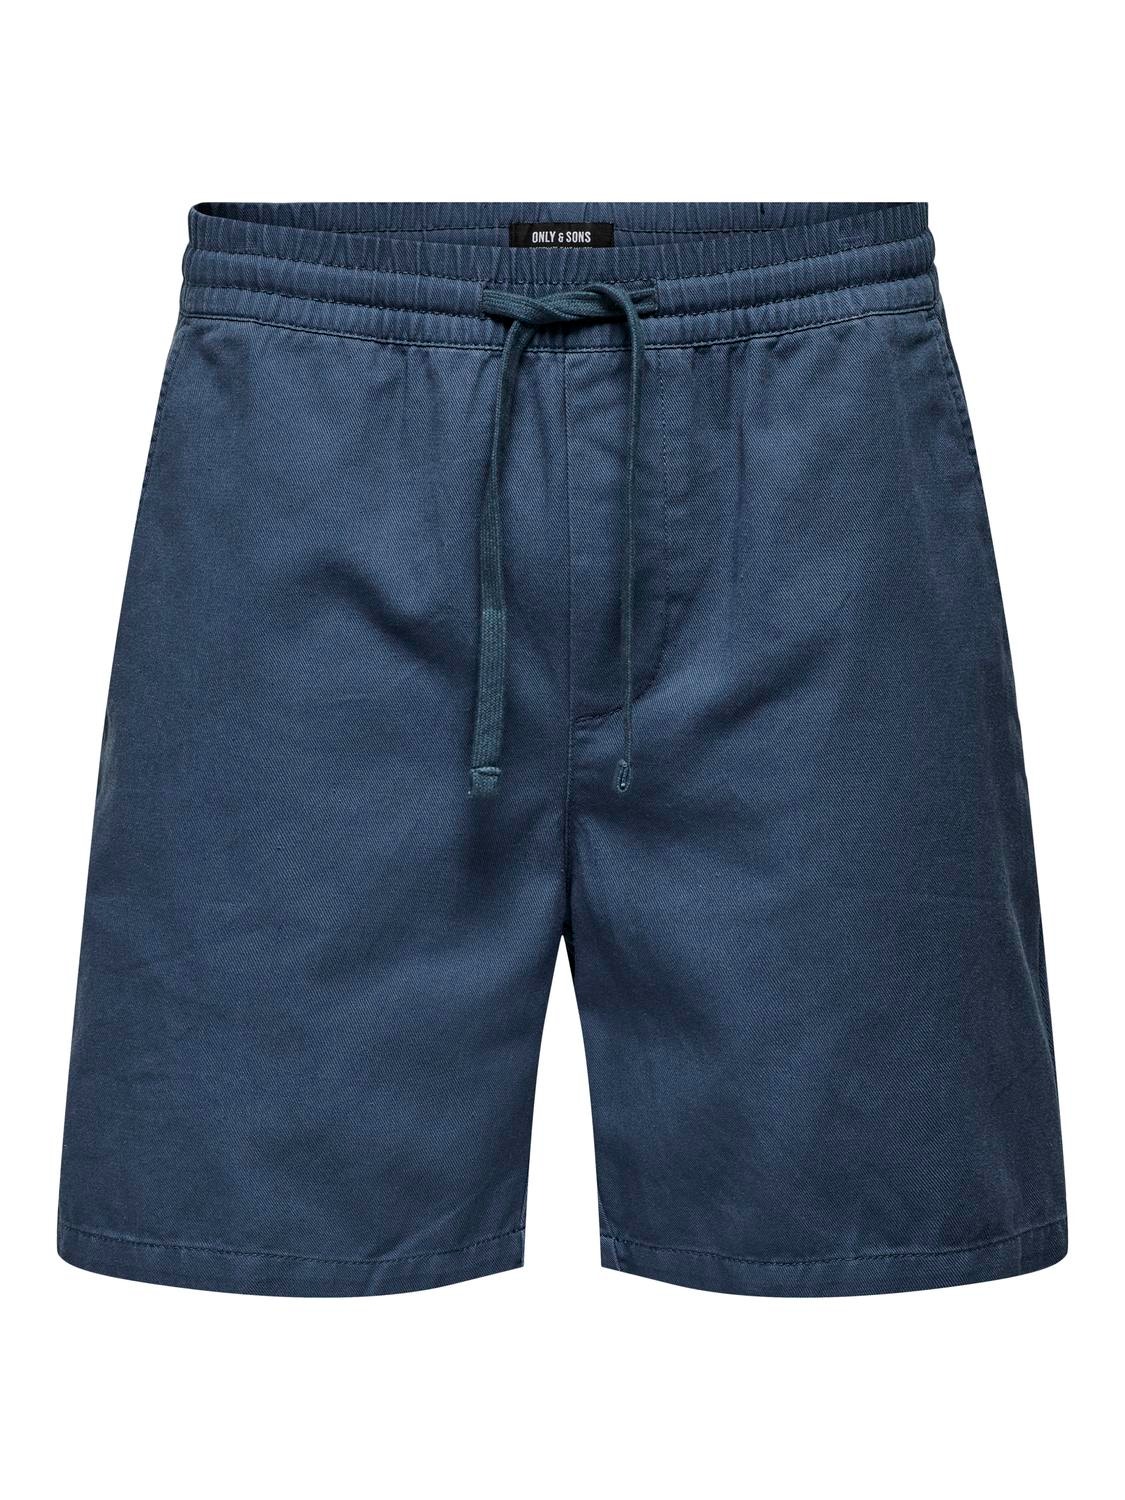 ONLY & SONS Shorts with mid waist -Sargasso Sea - 22025790